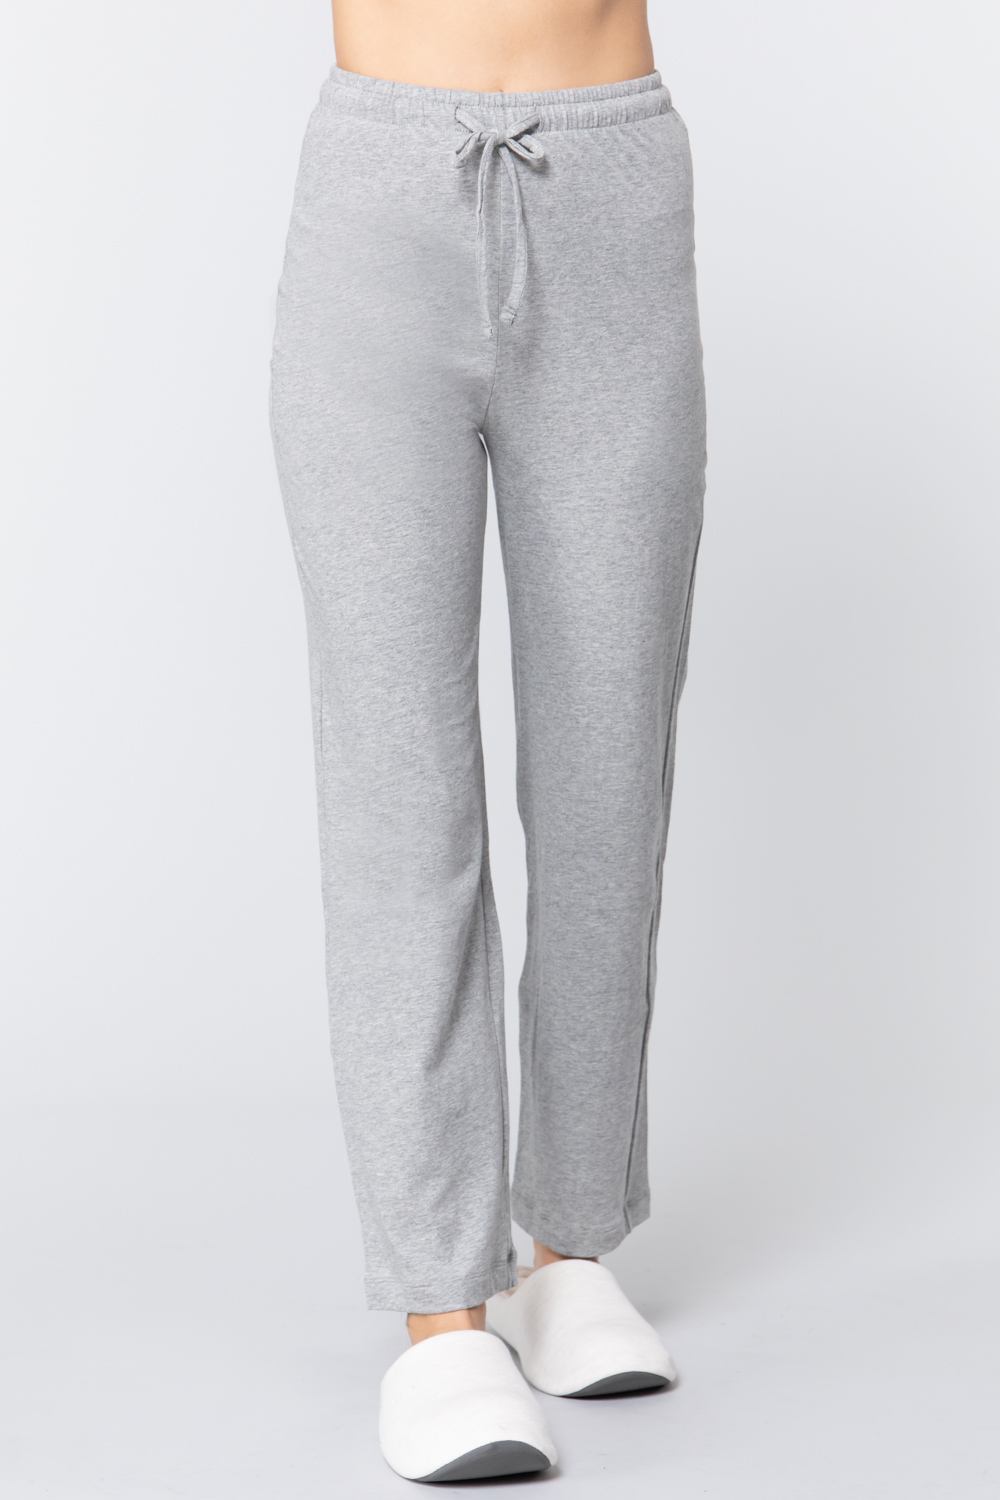 Our Best Solid Color 100% Cotton Drawstring Waist Pajama Pants (Heather Grey)